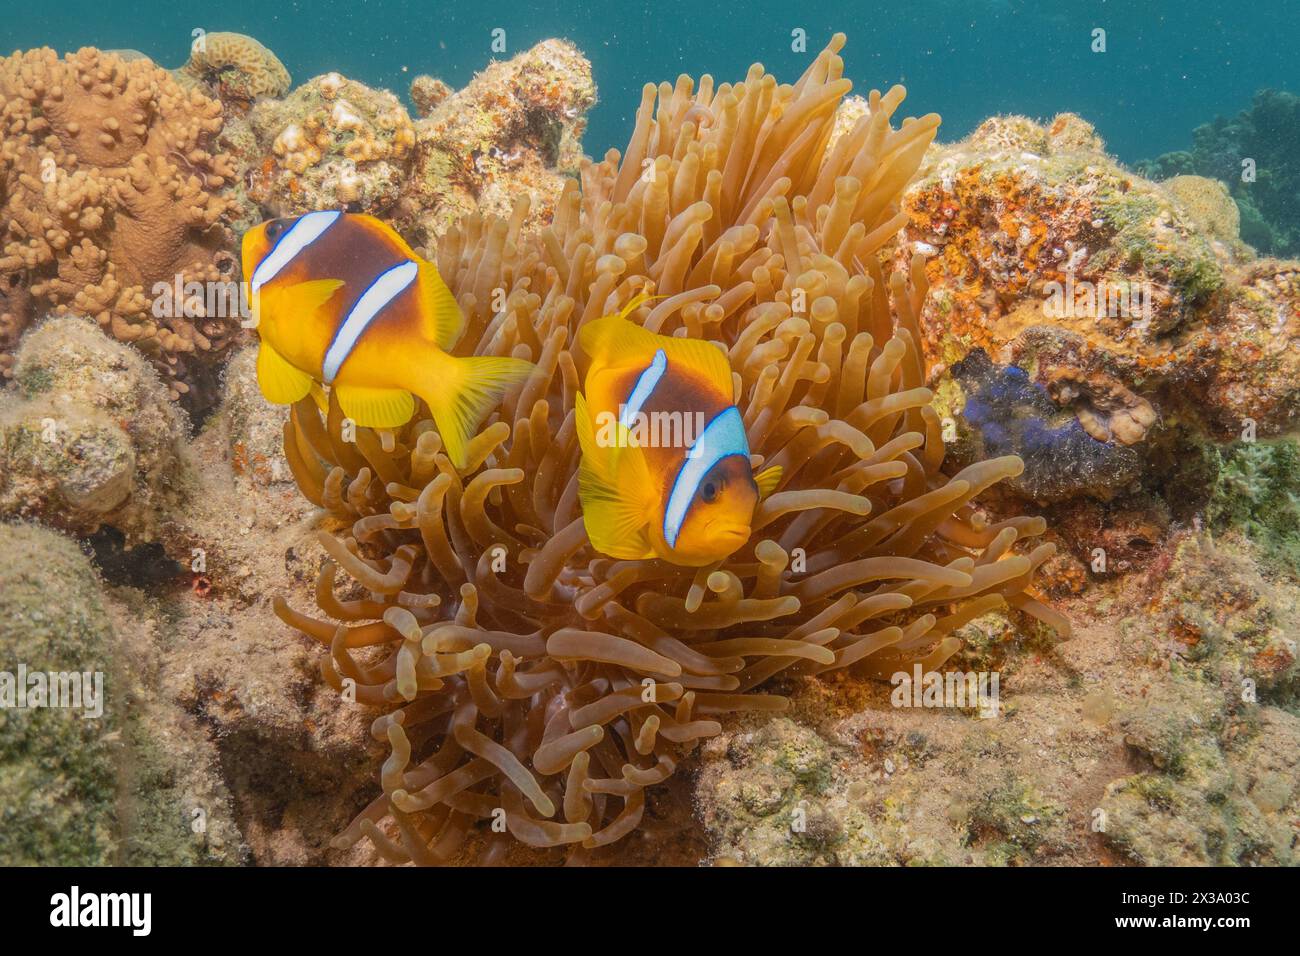 Coral reef and water plants in the Red Sea, Eilat Israel Stock Photo